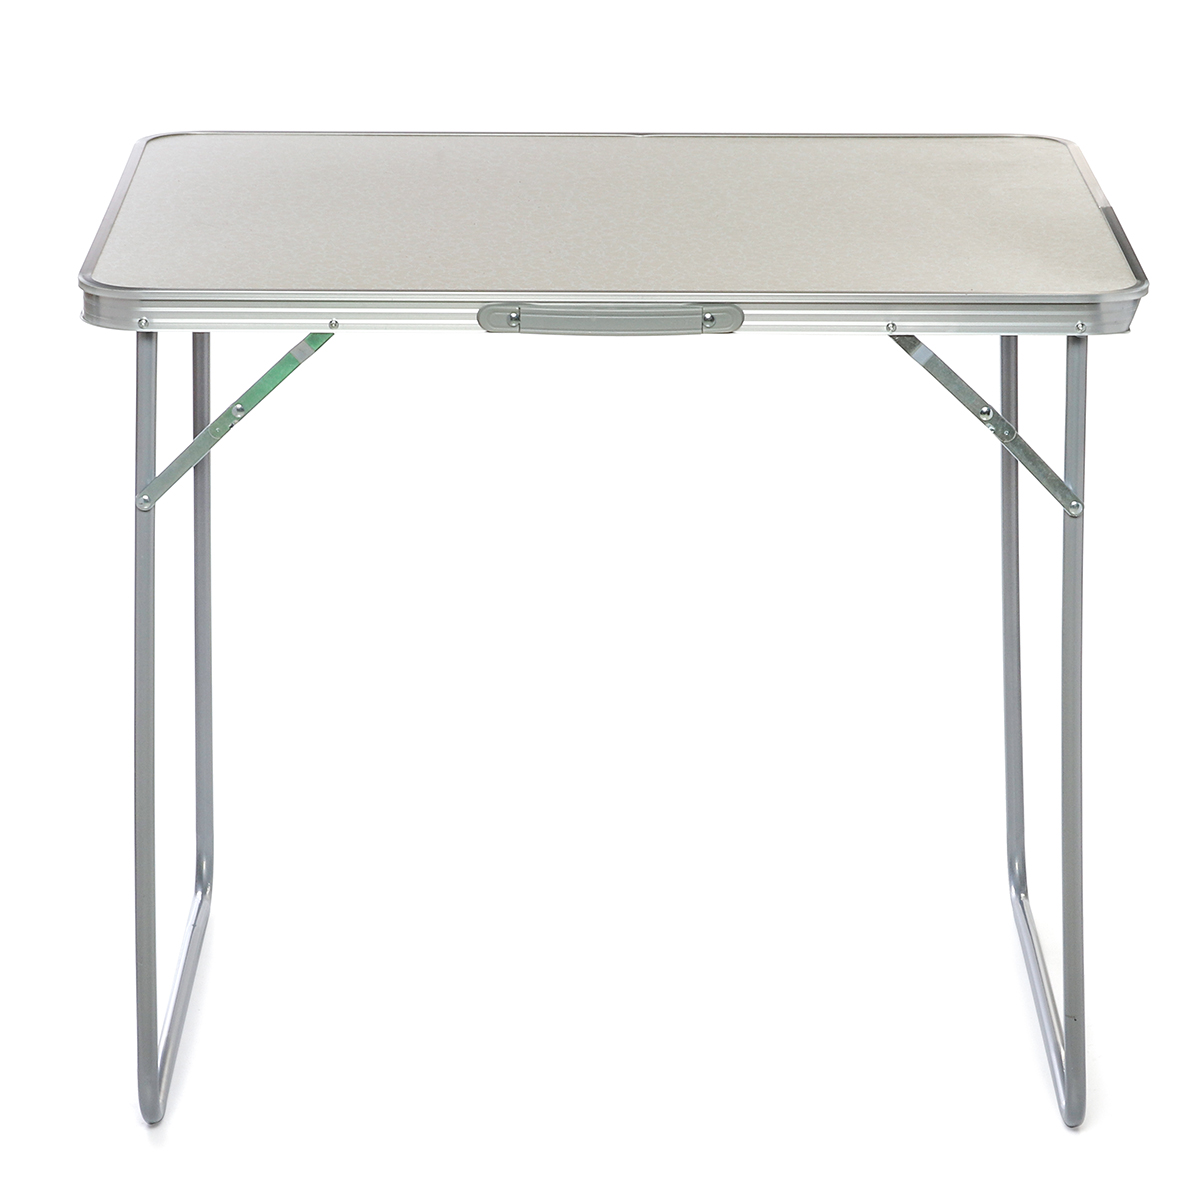 Portable-Folding-Table-Laptop-Desk-Study-Table-Aluminum-Camping-Table-with-Carrying-Handle-and-Folda-1740327